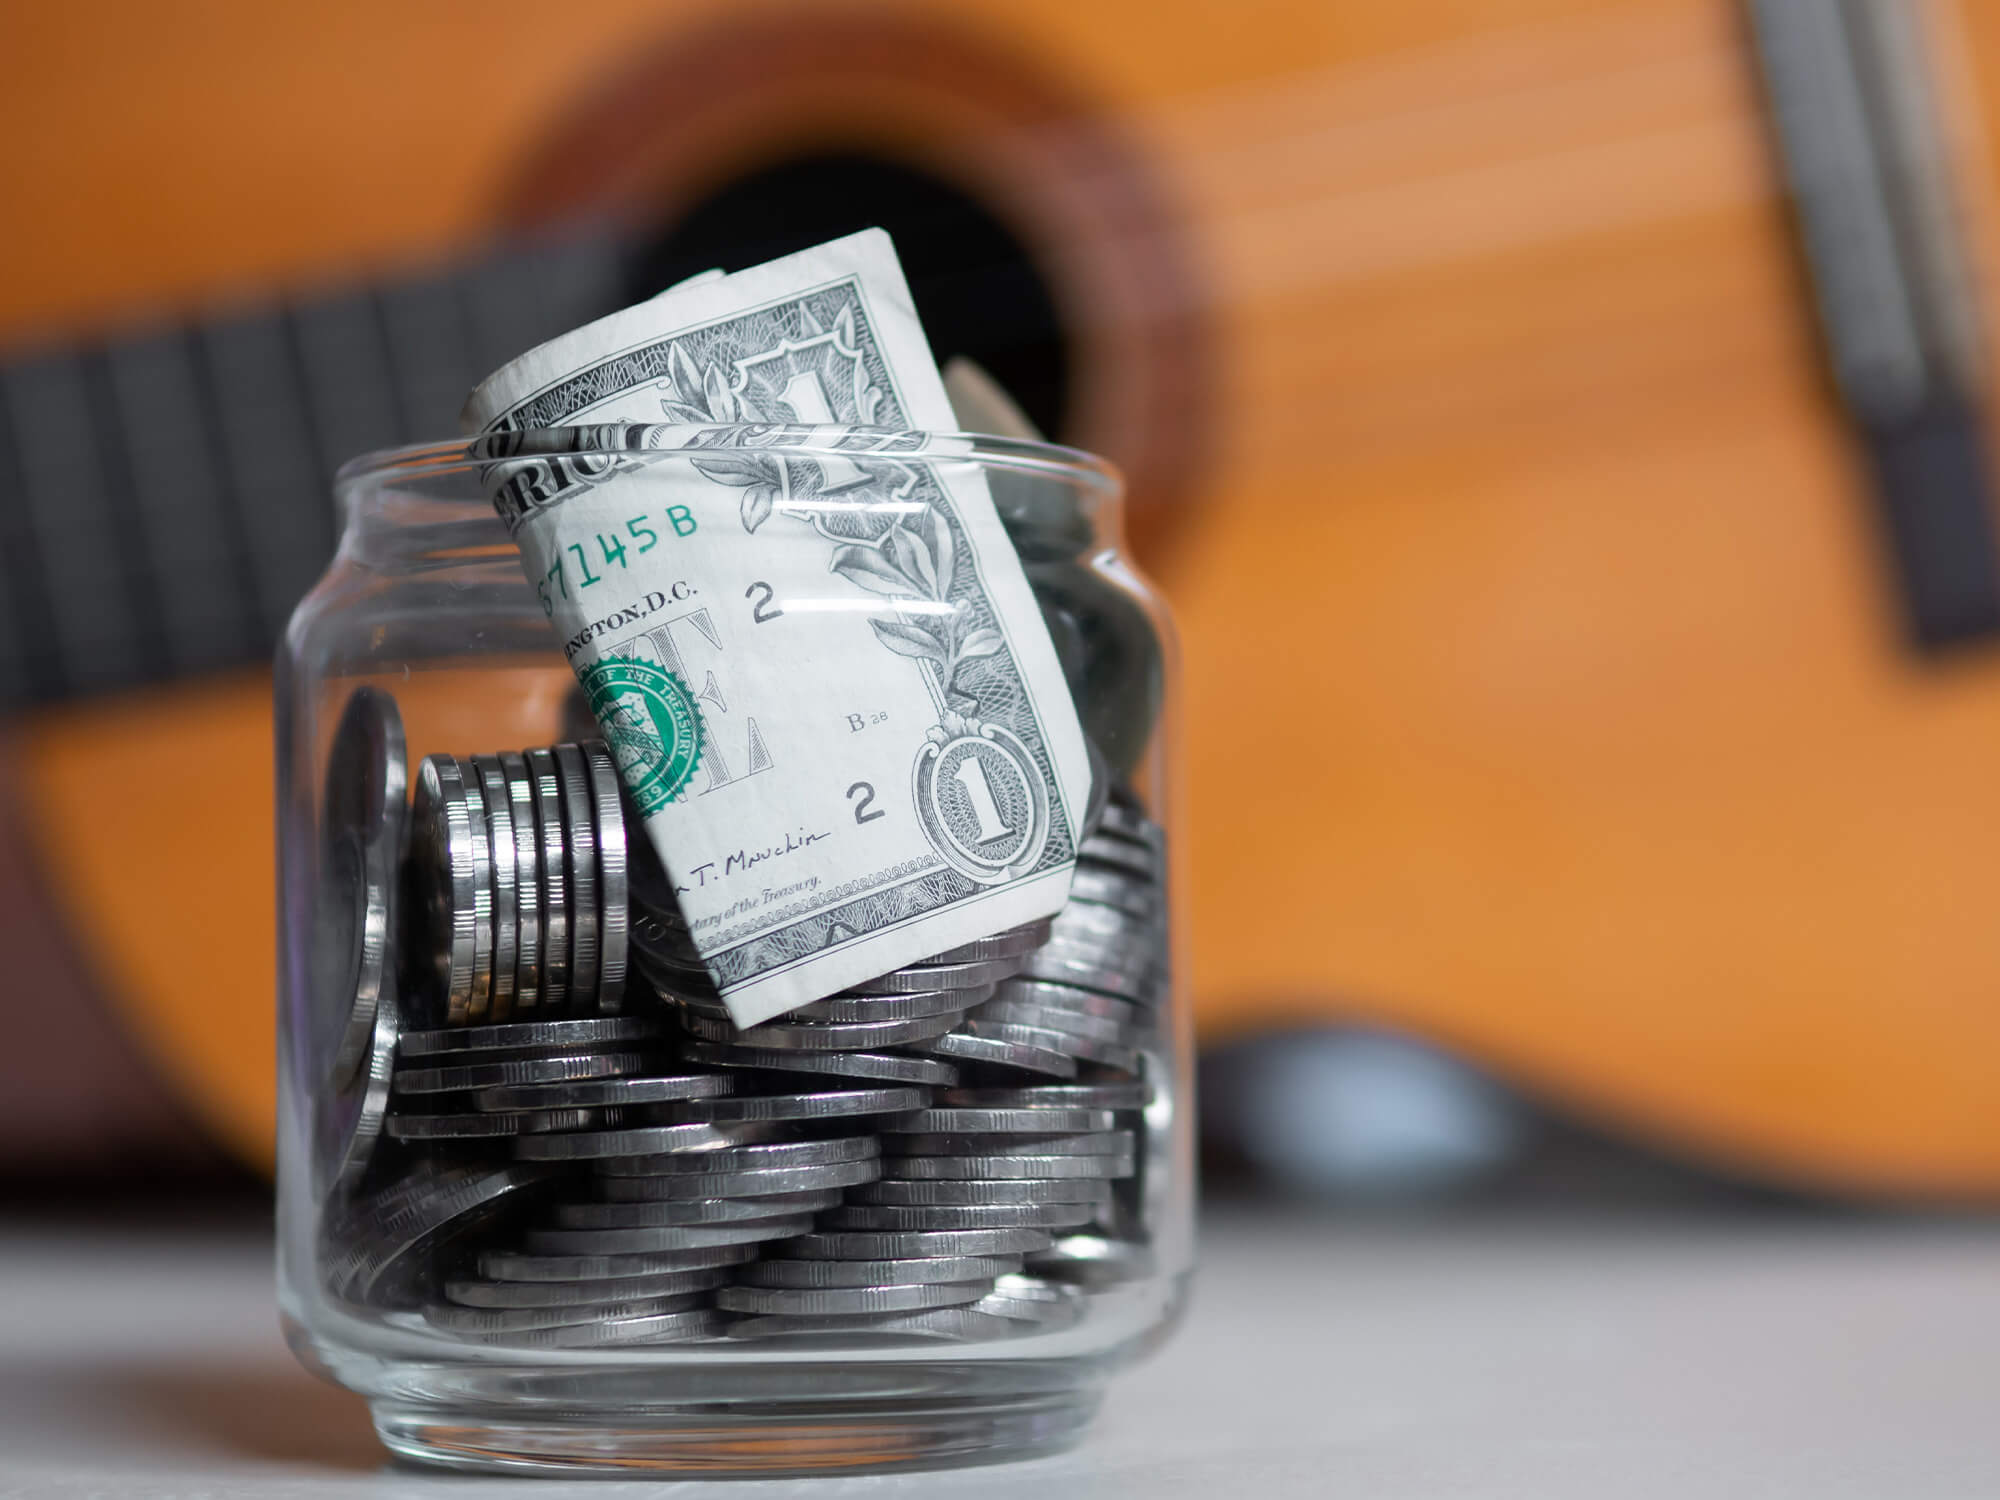 A glass jar showing silver coins an a bank note poking out of it. Blurred in the background, there is an acoustic guitar.